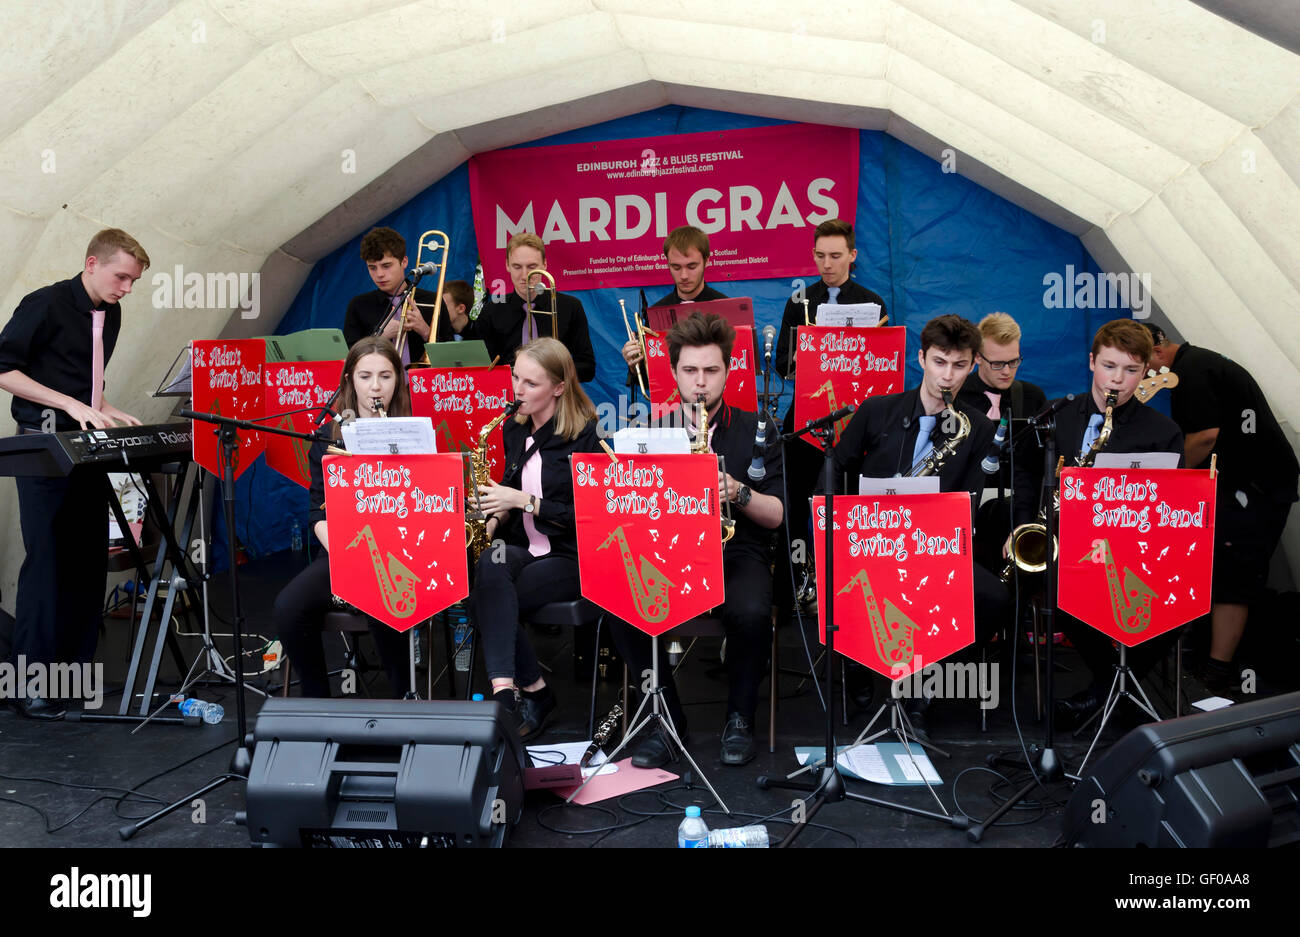 The St. Aiden's Swing Band (school band) playing at the Mardi Gras, part of the Edinburgh Jazz Festival. Stock Photo